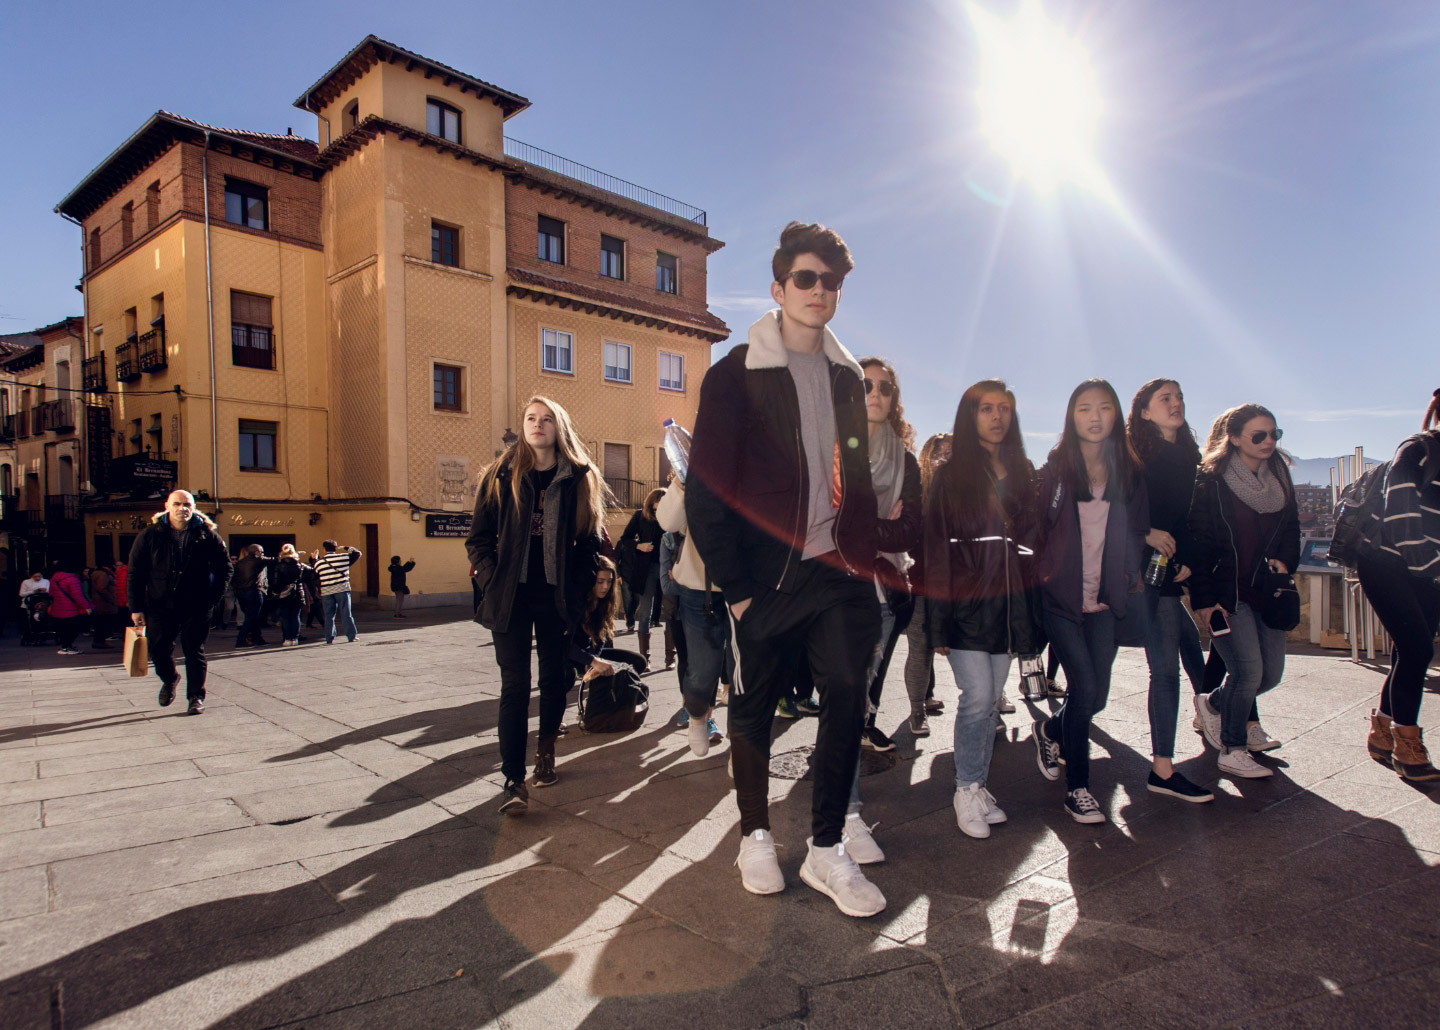 group of students walking together underneath the sun